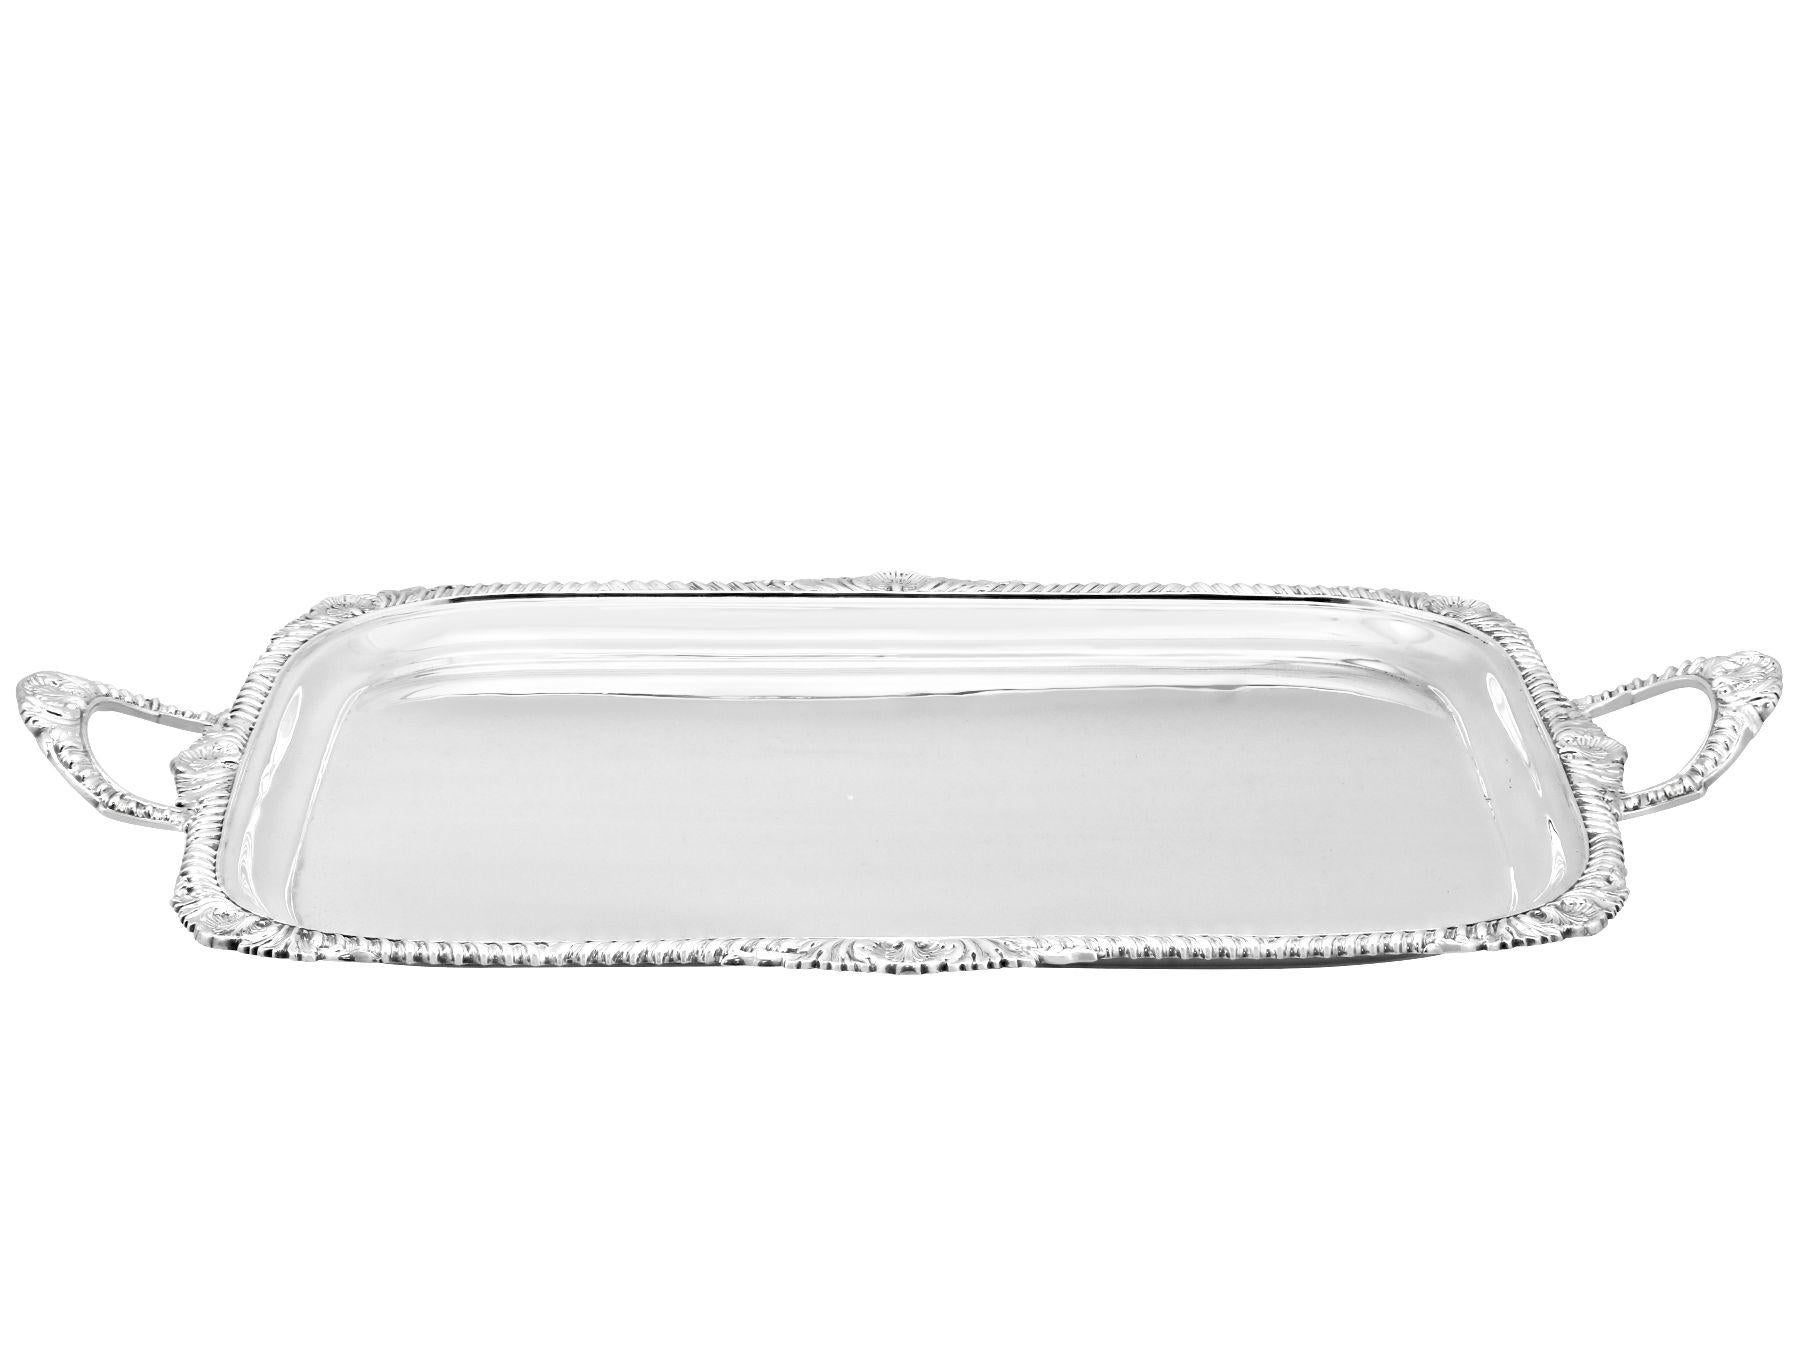 An exceptional, fine and impressive antique Victorian English sterling silver tray; an addition to our range of silver trays, salvers and plates

This exceptional antique Victorian sterling silver tray has a rectangular shaped form with rounded